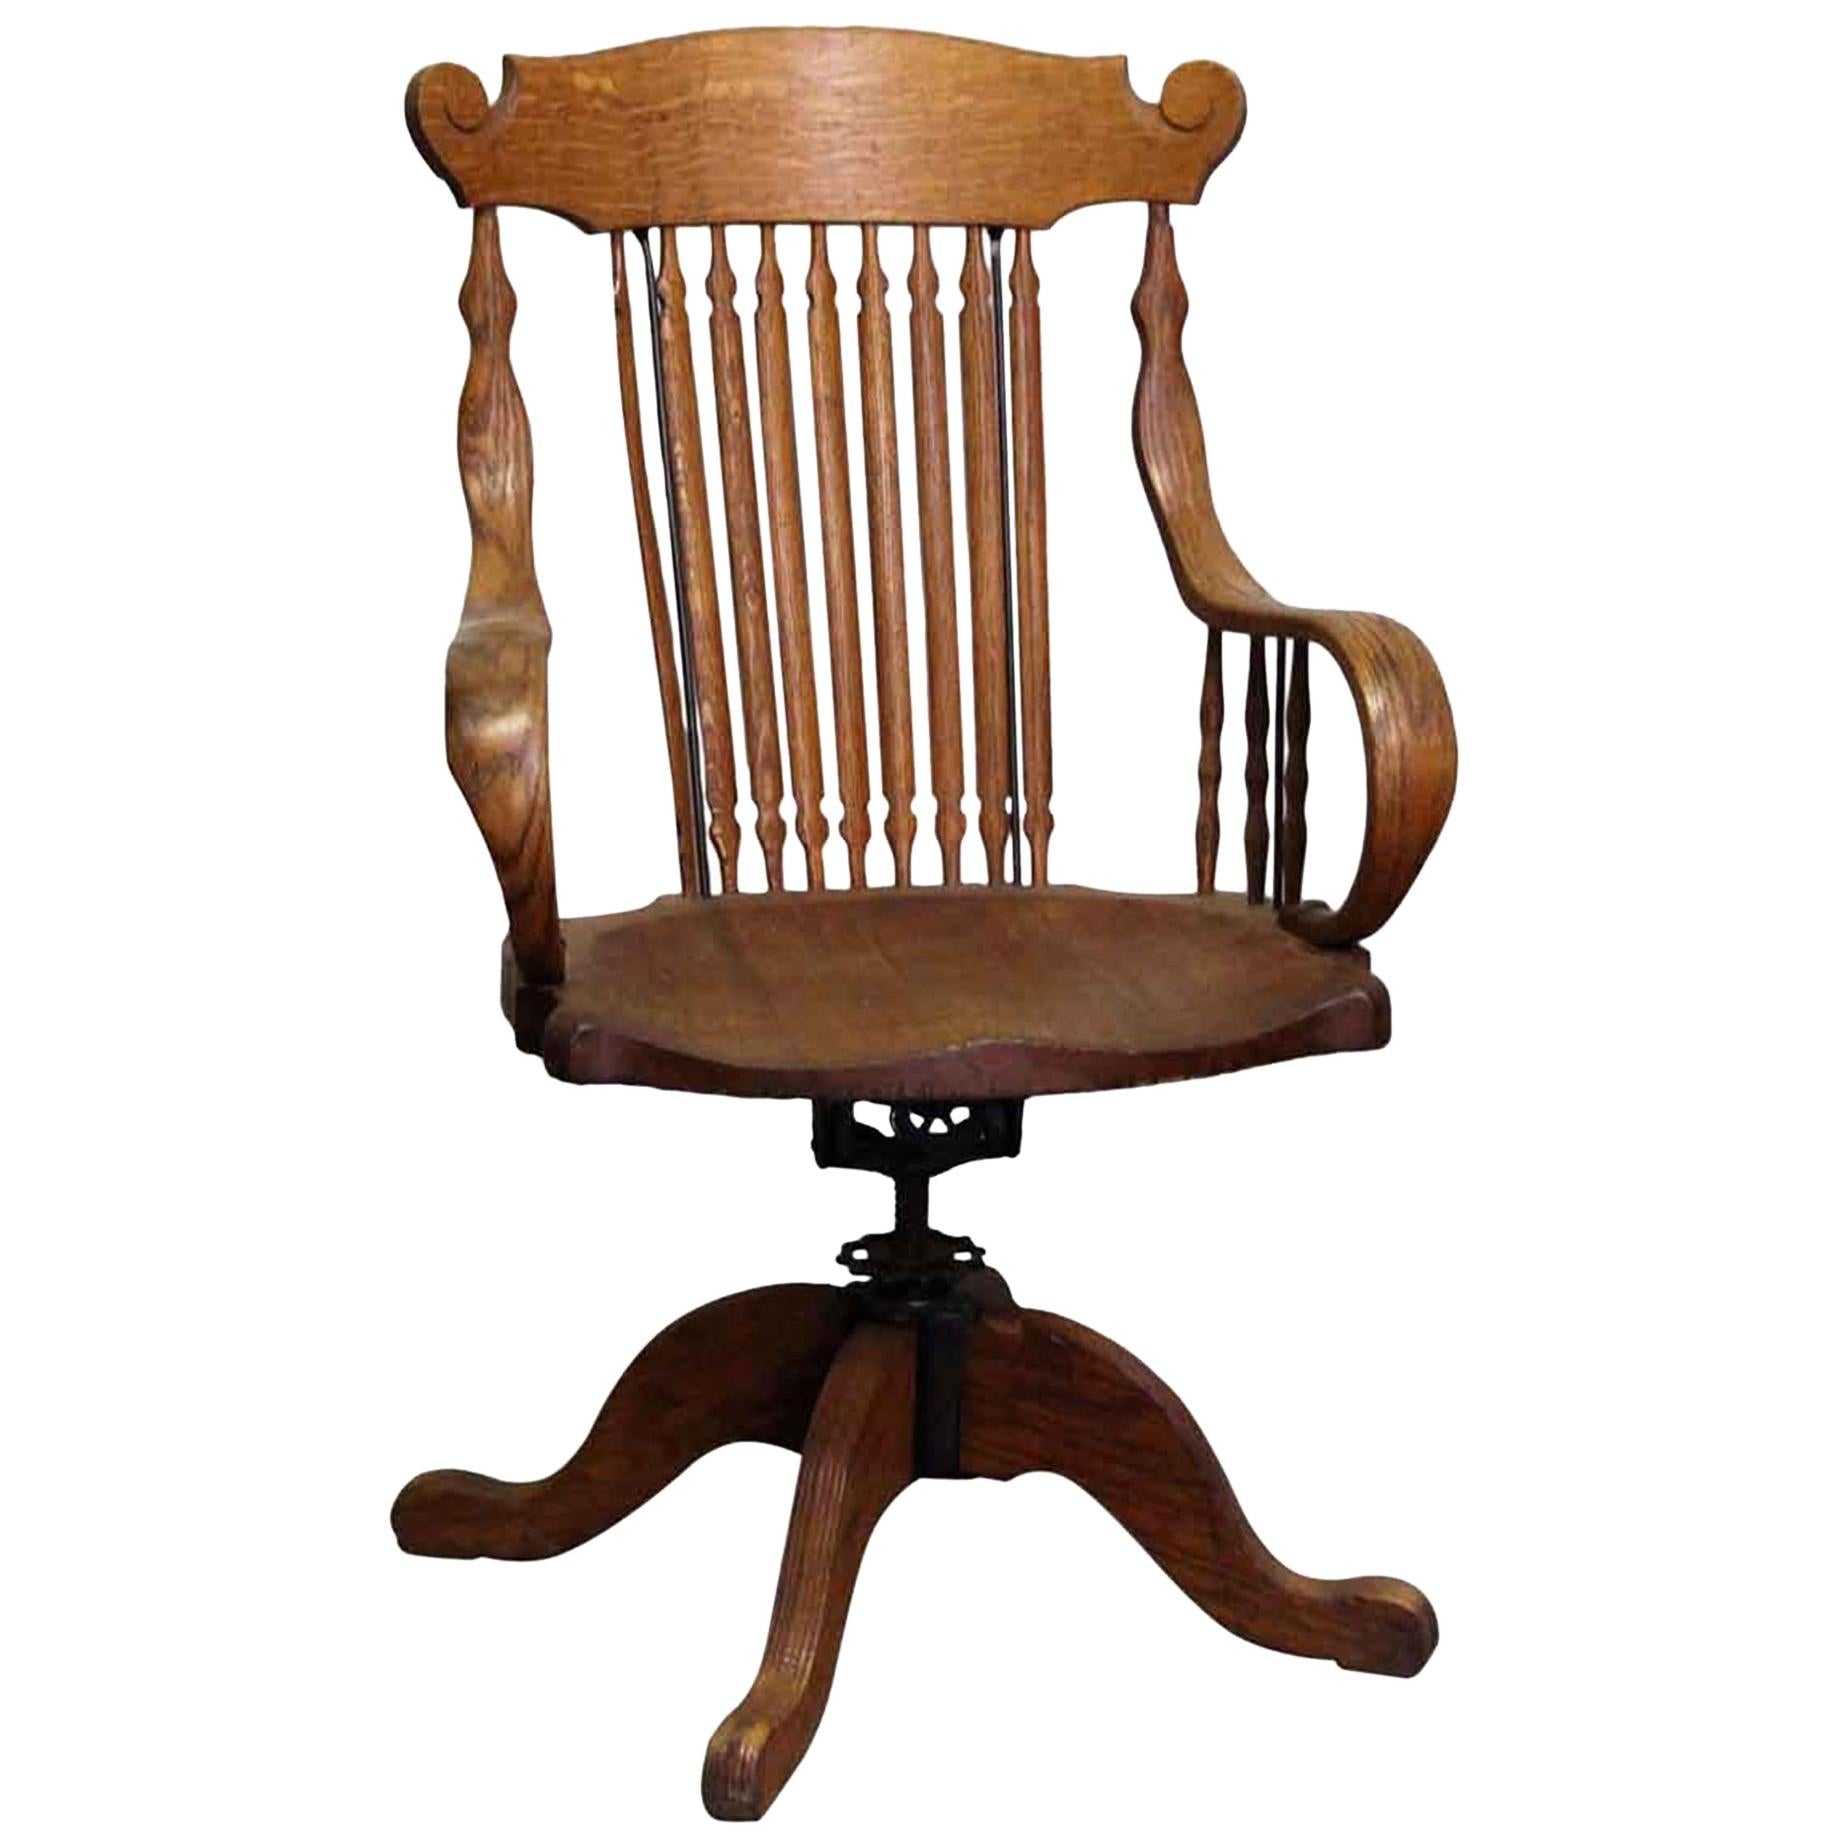 1920s Tiger Oak Spindle Back Adjustable Swivel Chair with Bentwood Arms